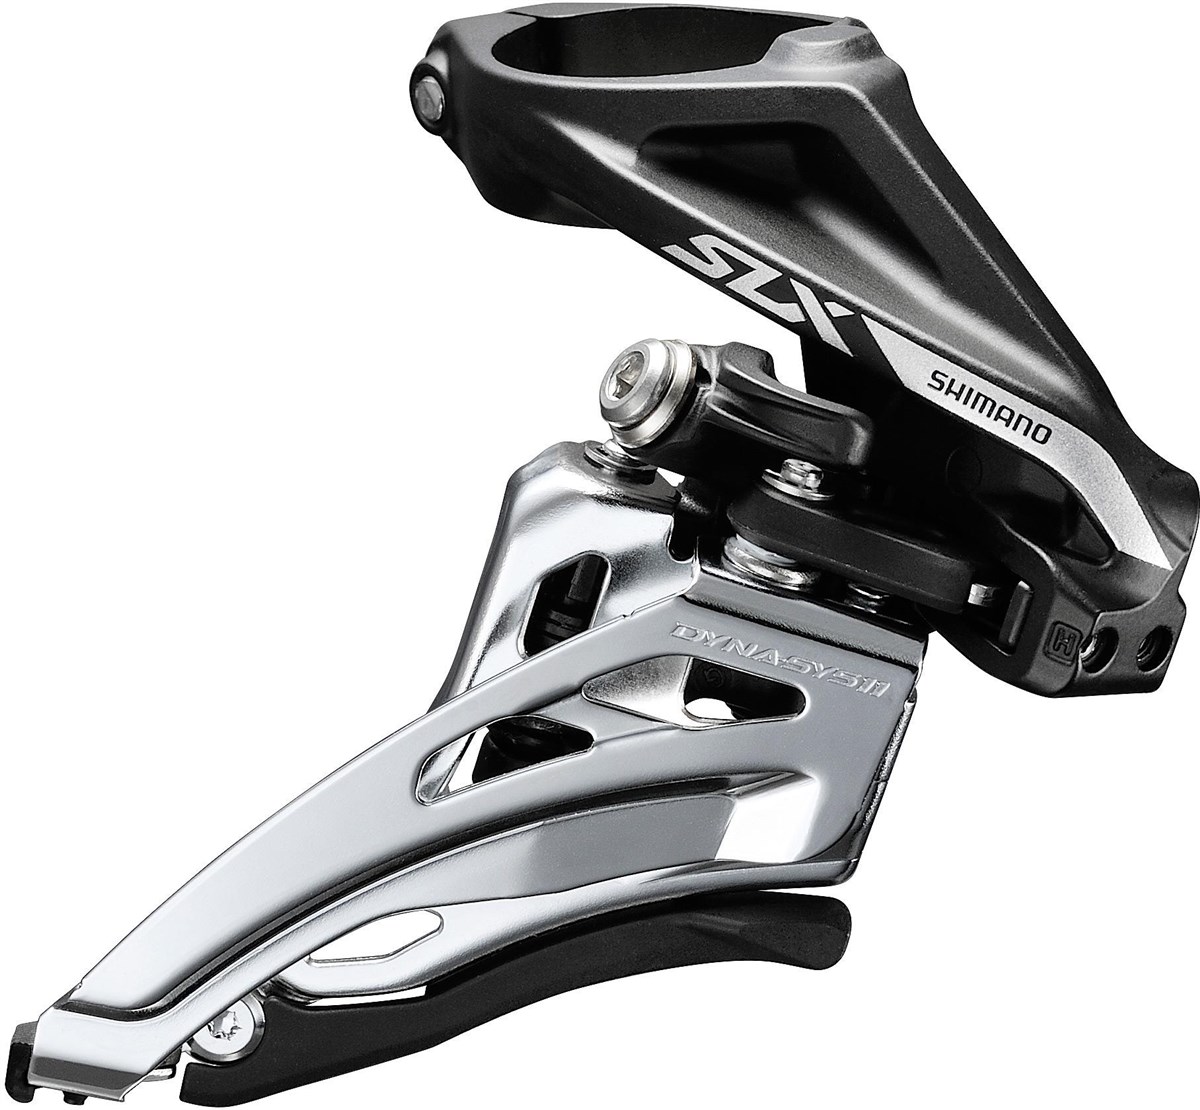 Shimano SLX M7020 Side Swing 11 Speed Front Derailleur product image